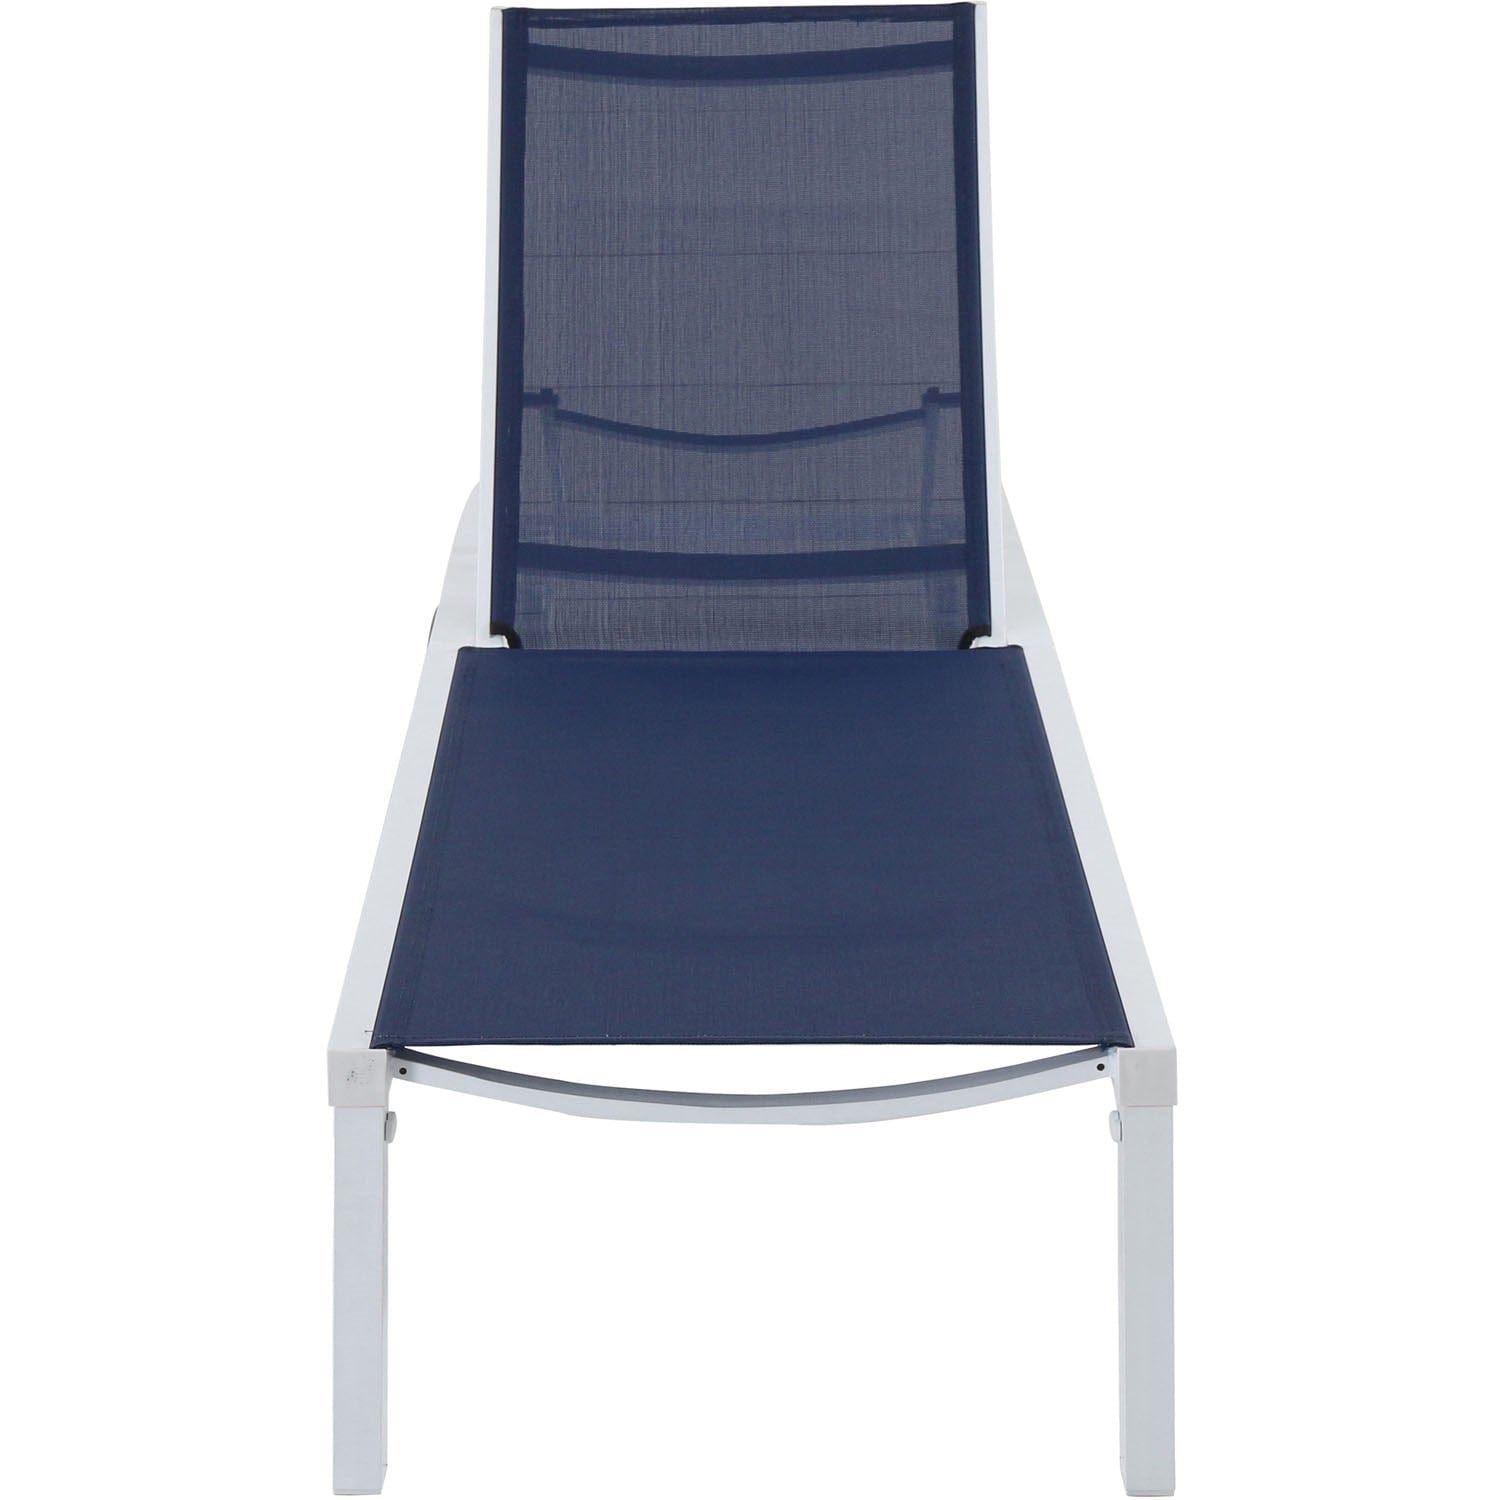 Hanover Hanover Windham Adjustable Sling Chaise in Navy Blue Sling and White Frame | WINDCHS-W-NVY